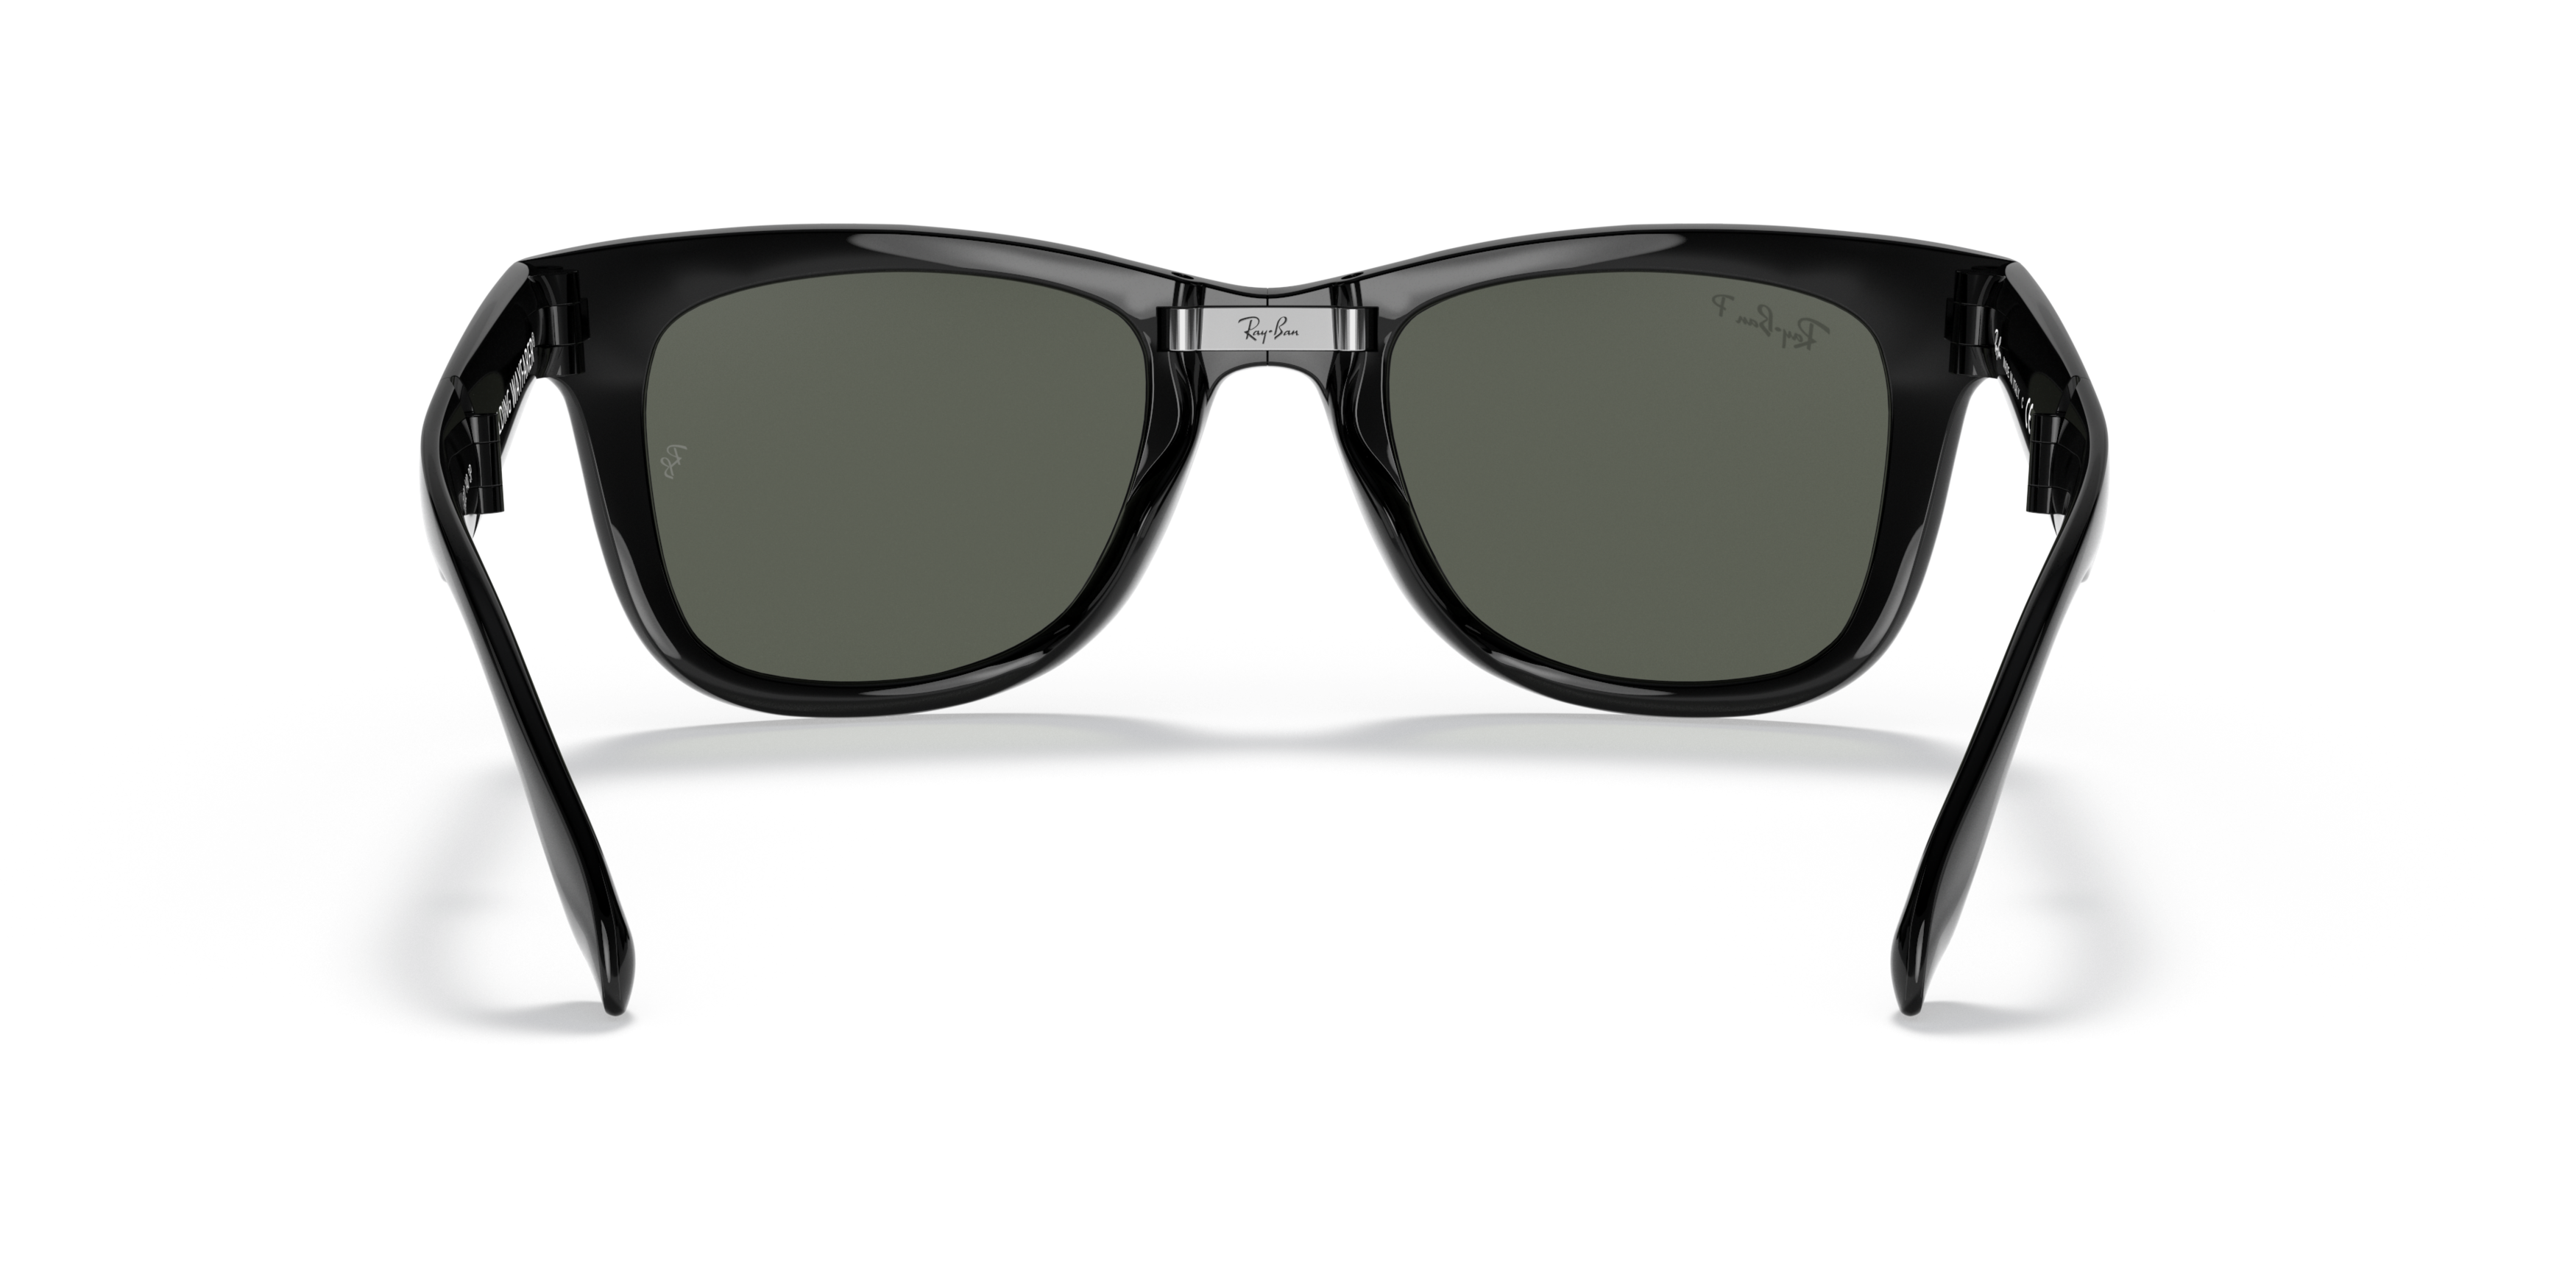 [products.image.detail02] Ray-Ban Wayfarer Folding Classic RB4105 601/58